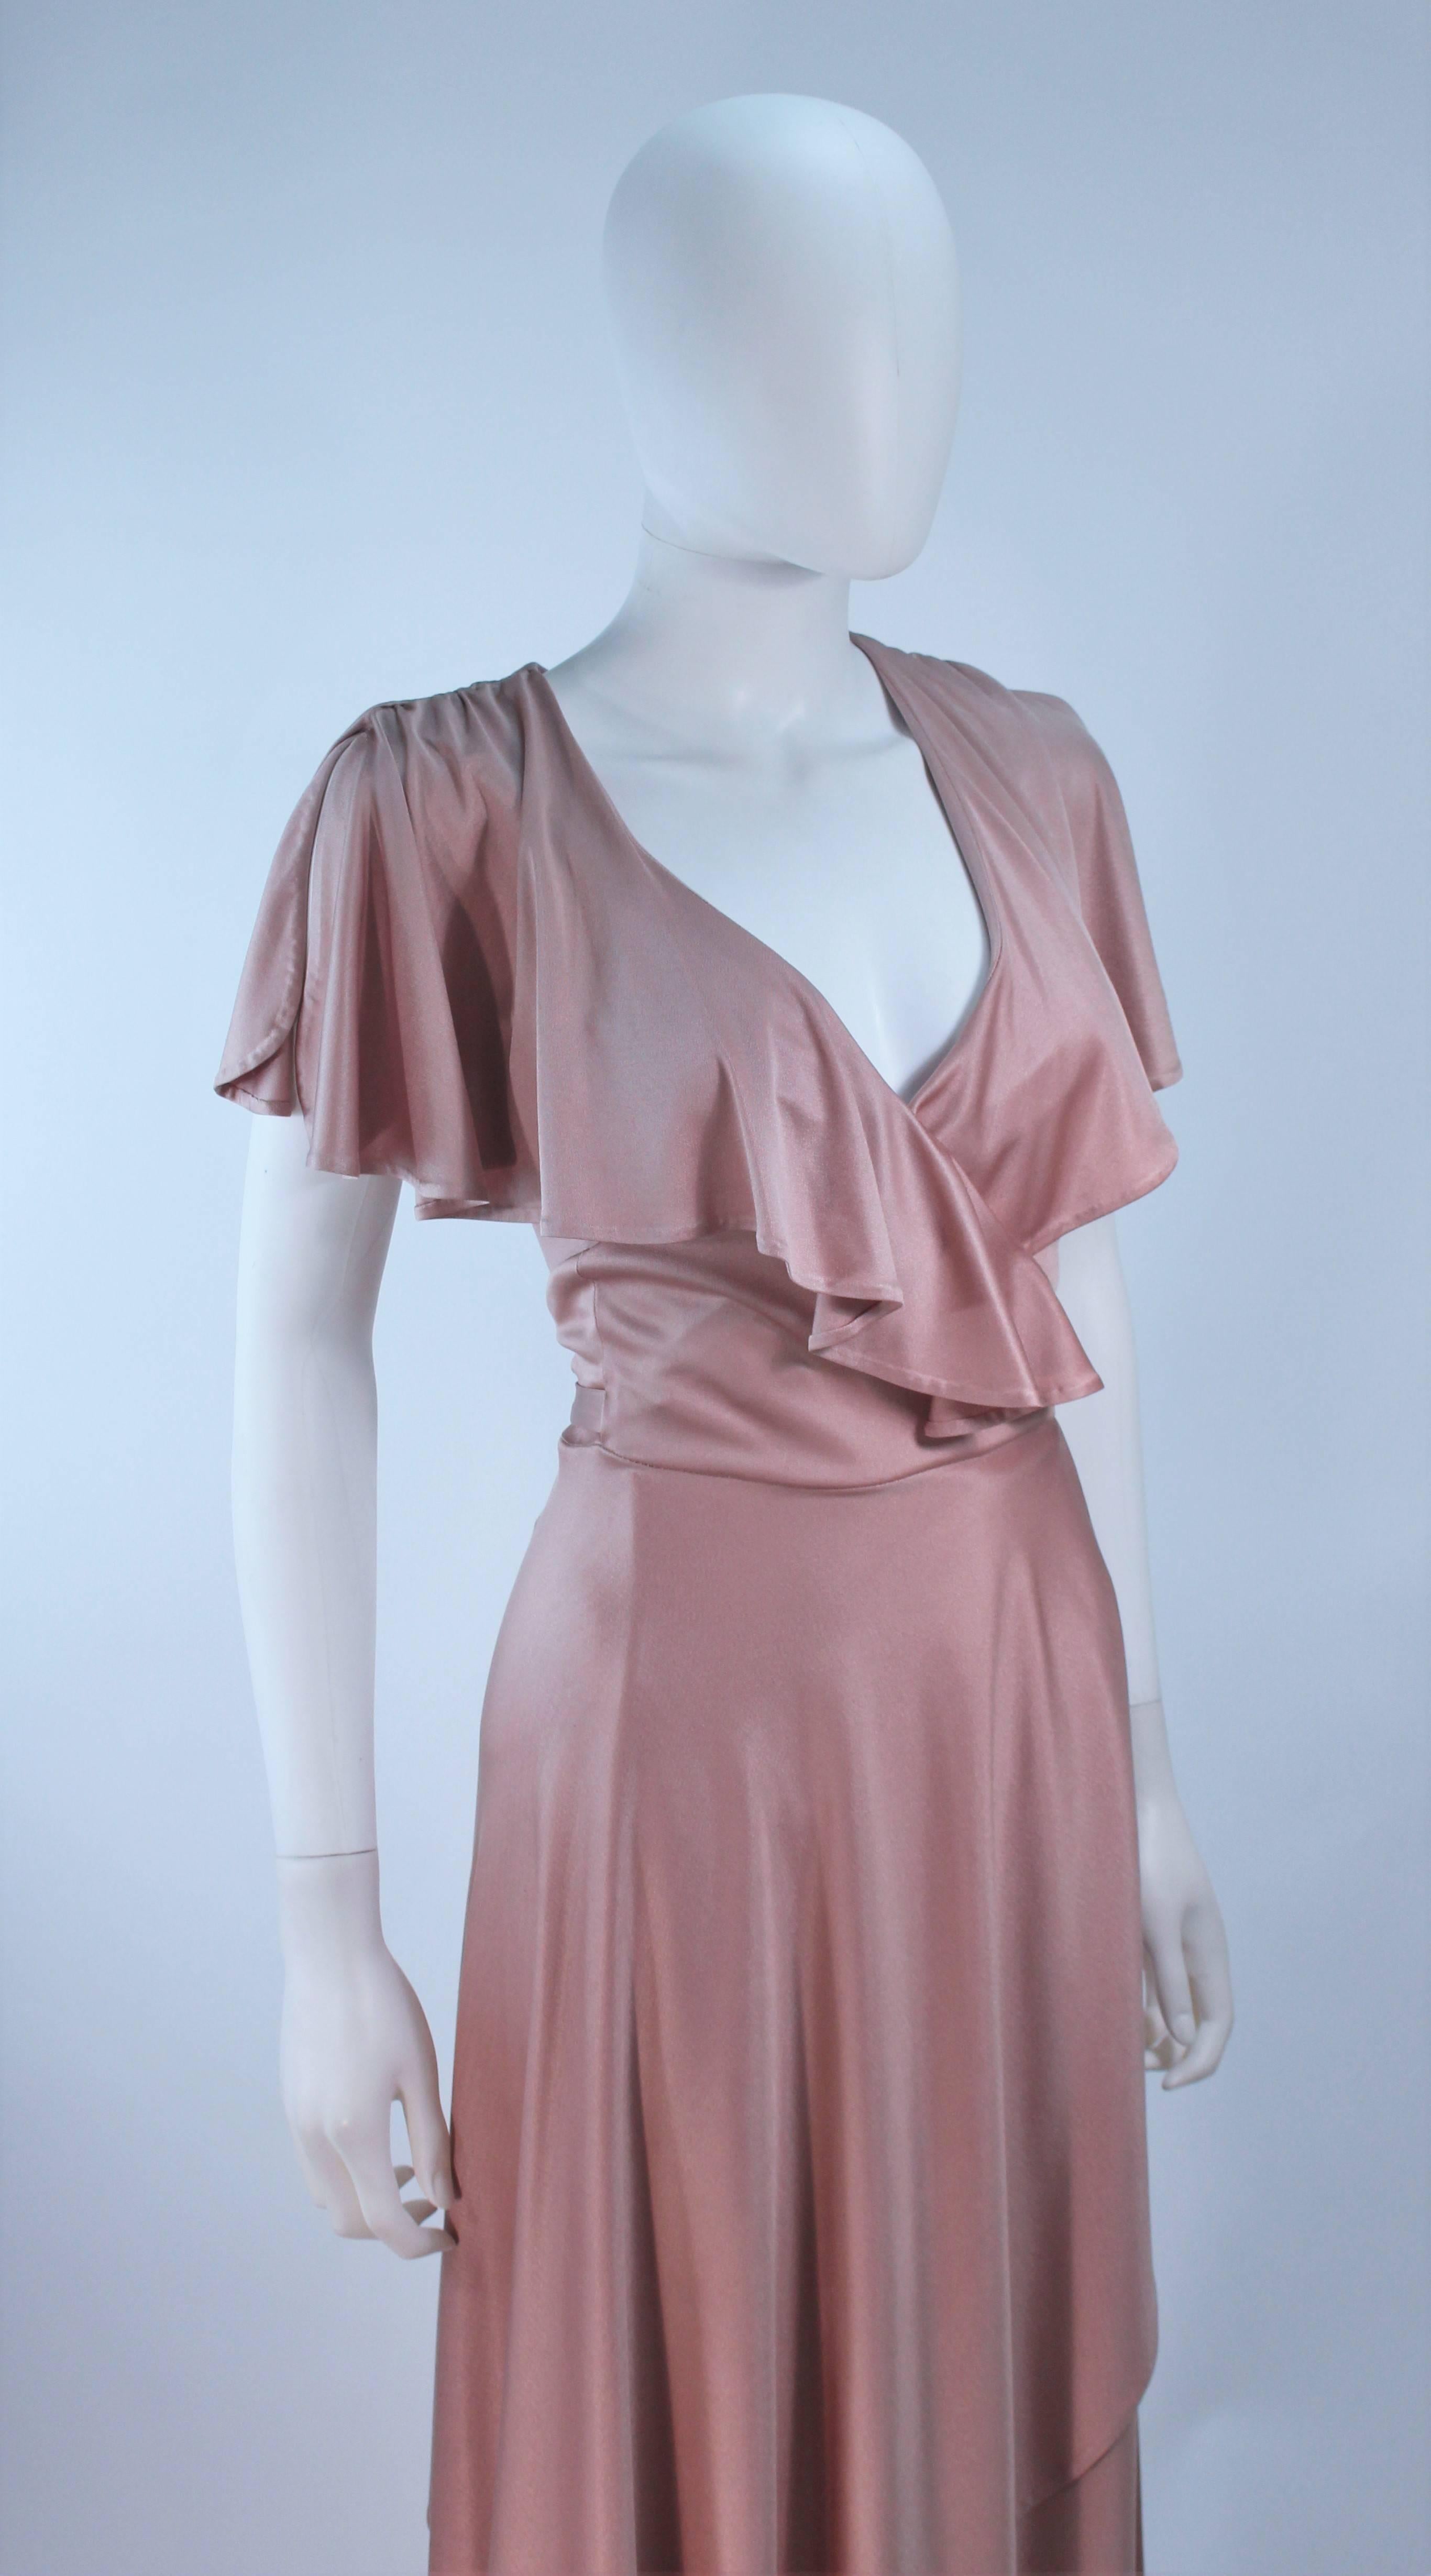 Women's ELIZABETH MASON COUTURE Blush Silk Jersey Ruffled Cocktail Dress Made to Order For Sale